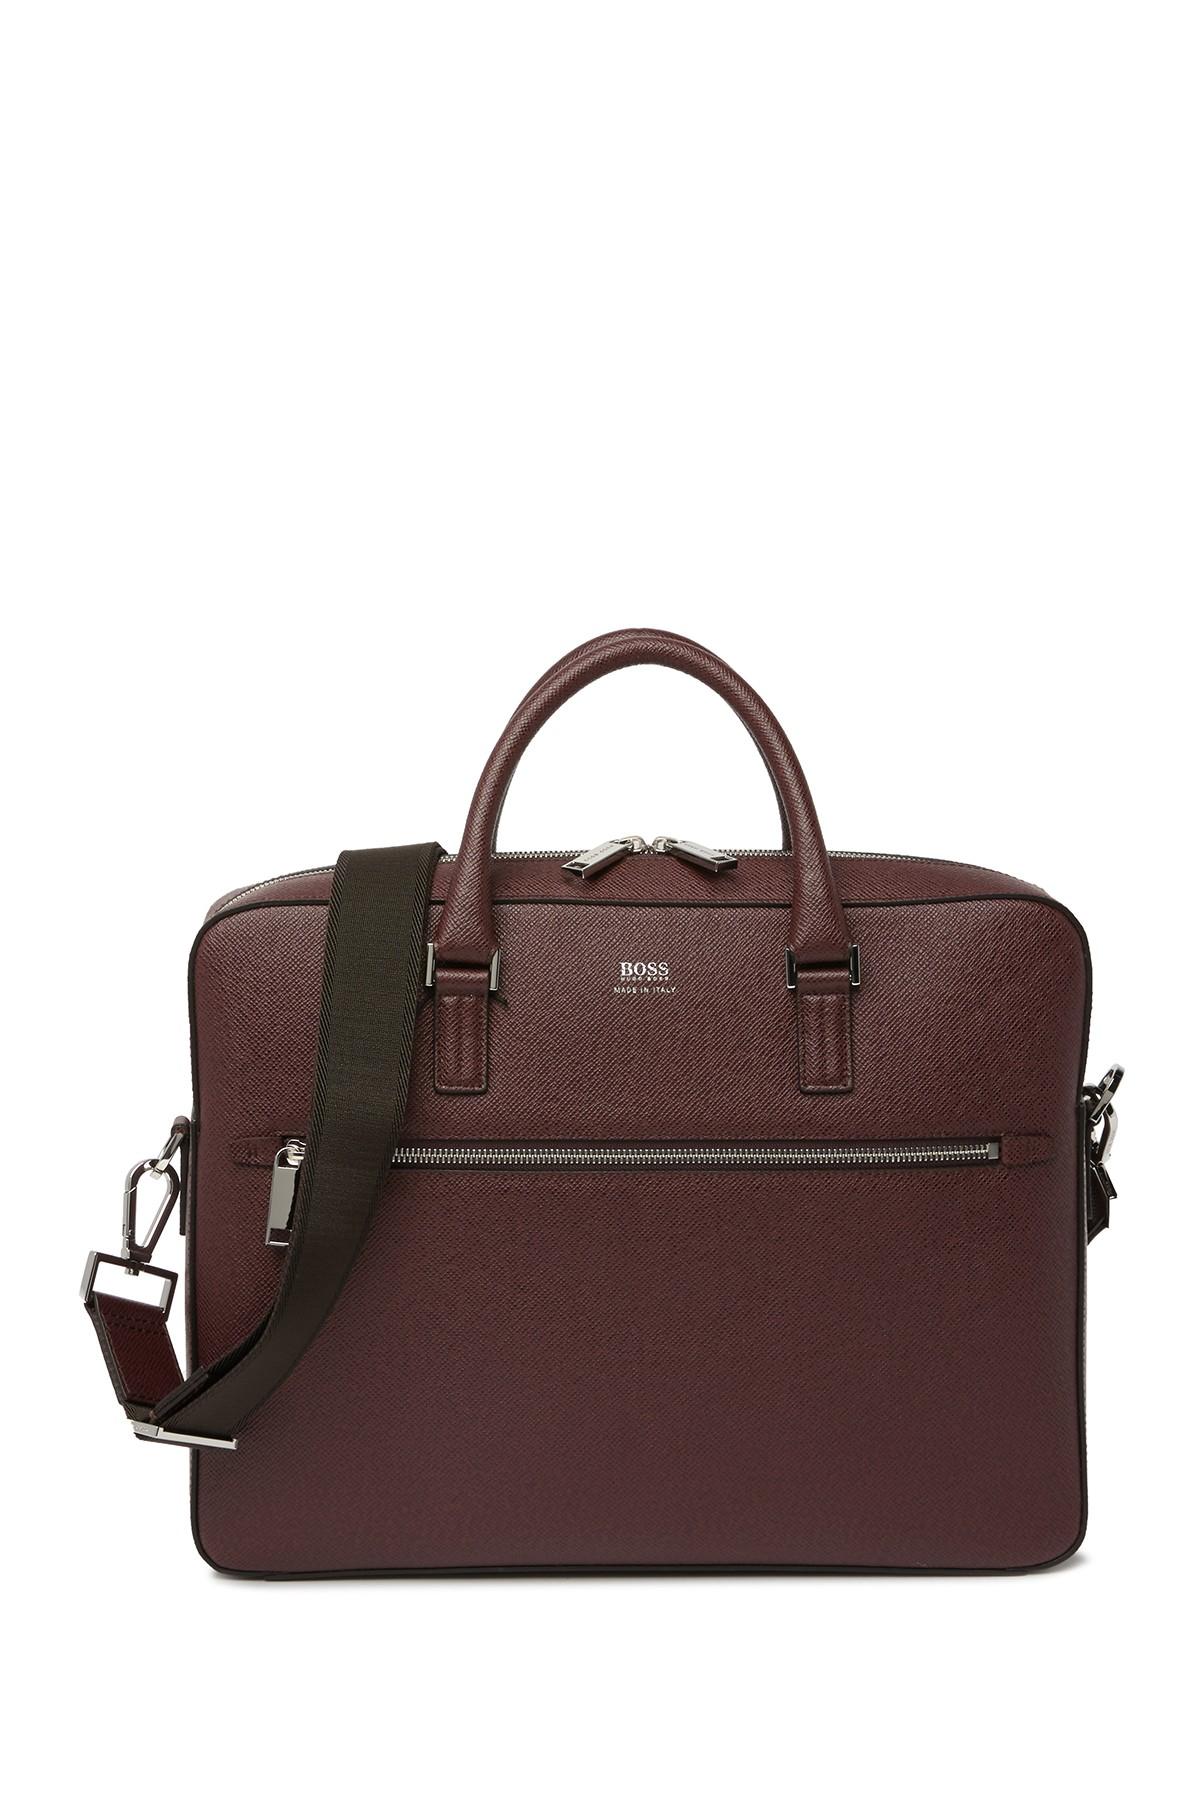 Looting plaintiff Microbe BOSS by HUGO BOSS Leather Signature Doc Laptop Bag in dk rd (Red) for Men |  Lyst